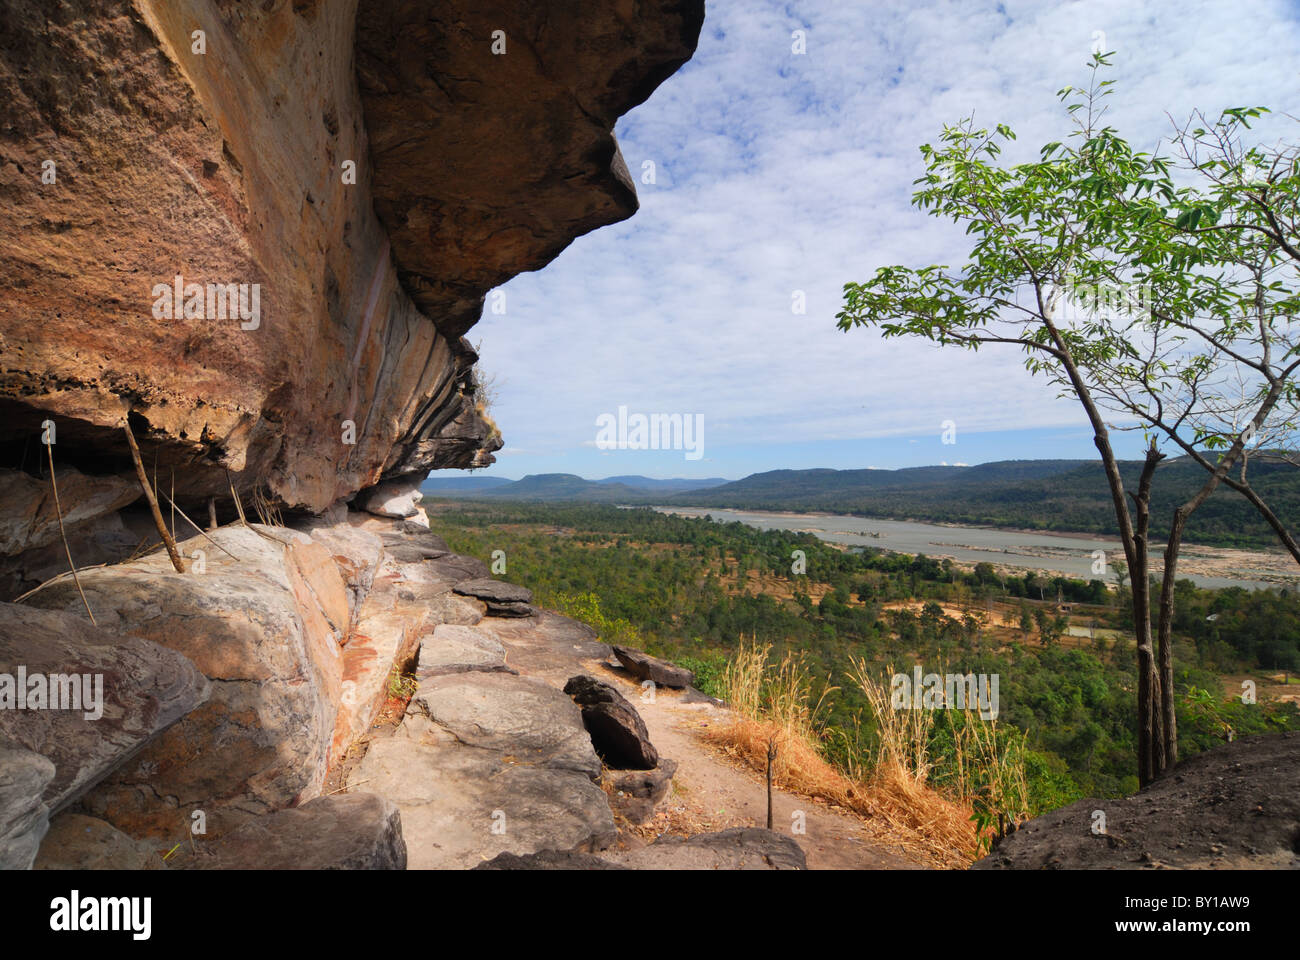 View of the Mekong river at the Pha Them national park in Thailand Stock Photo